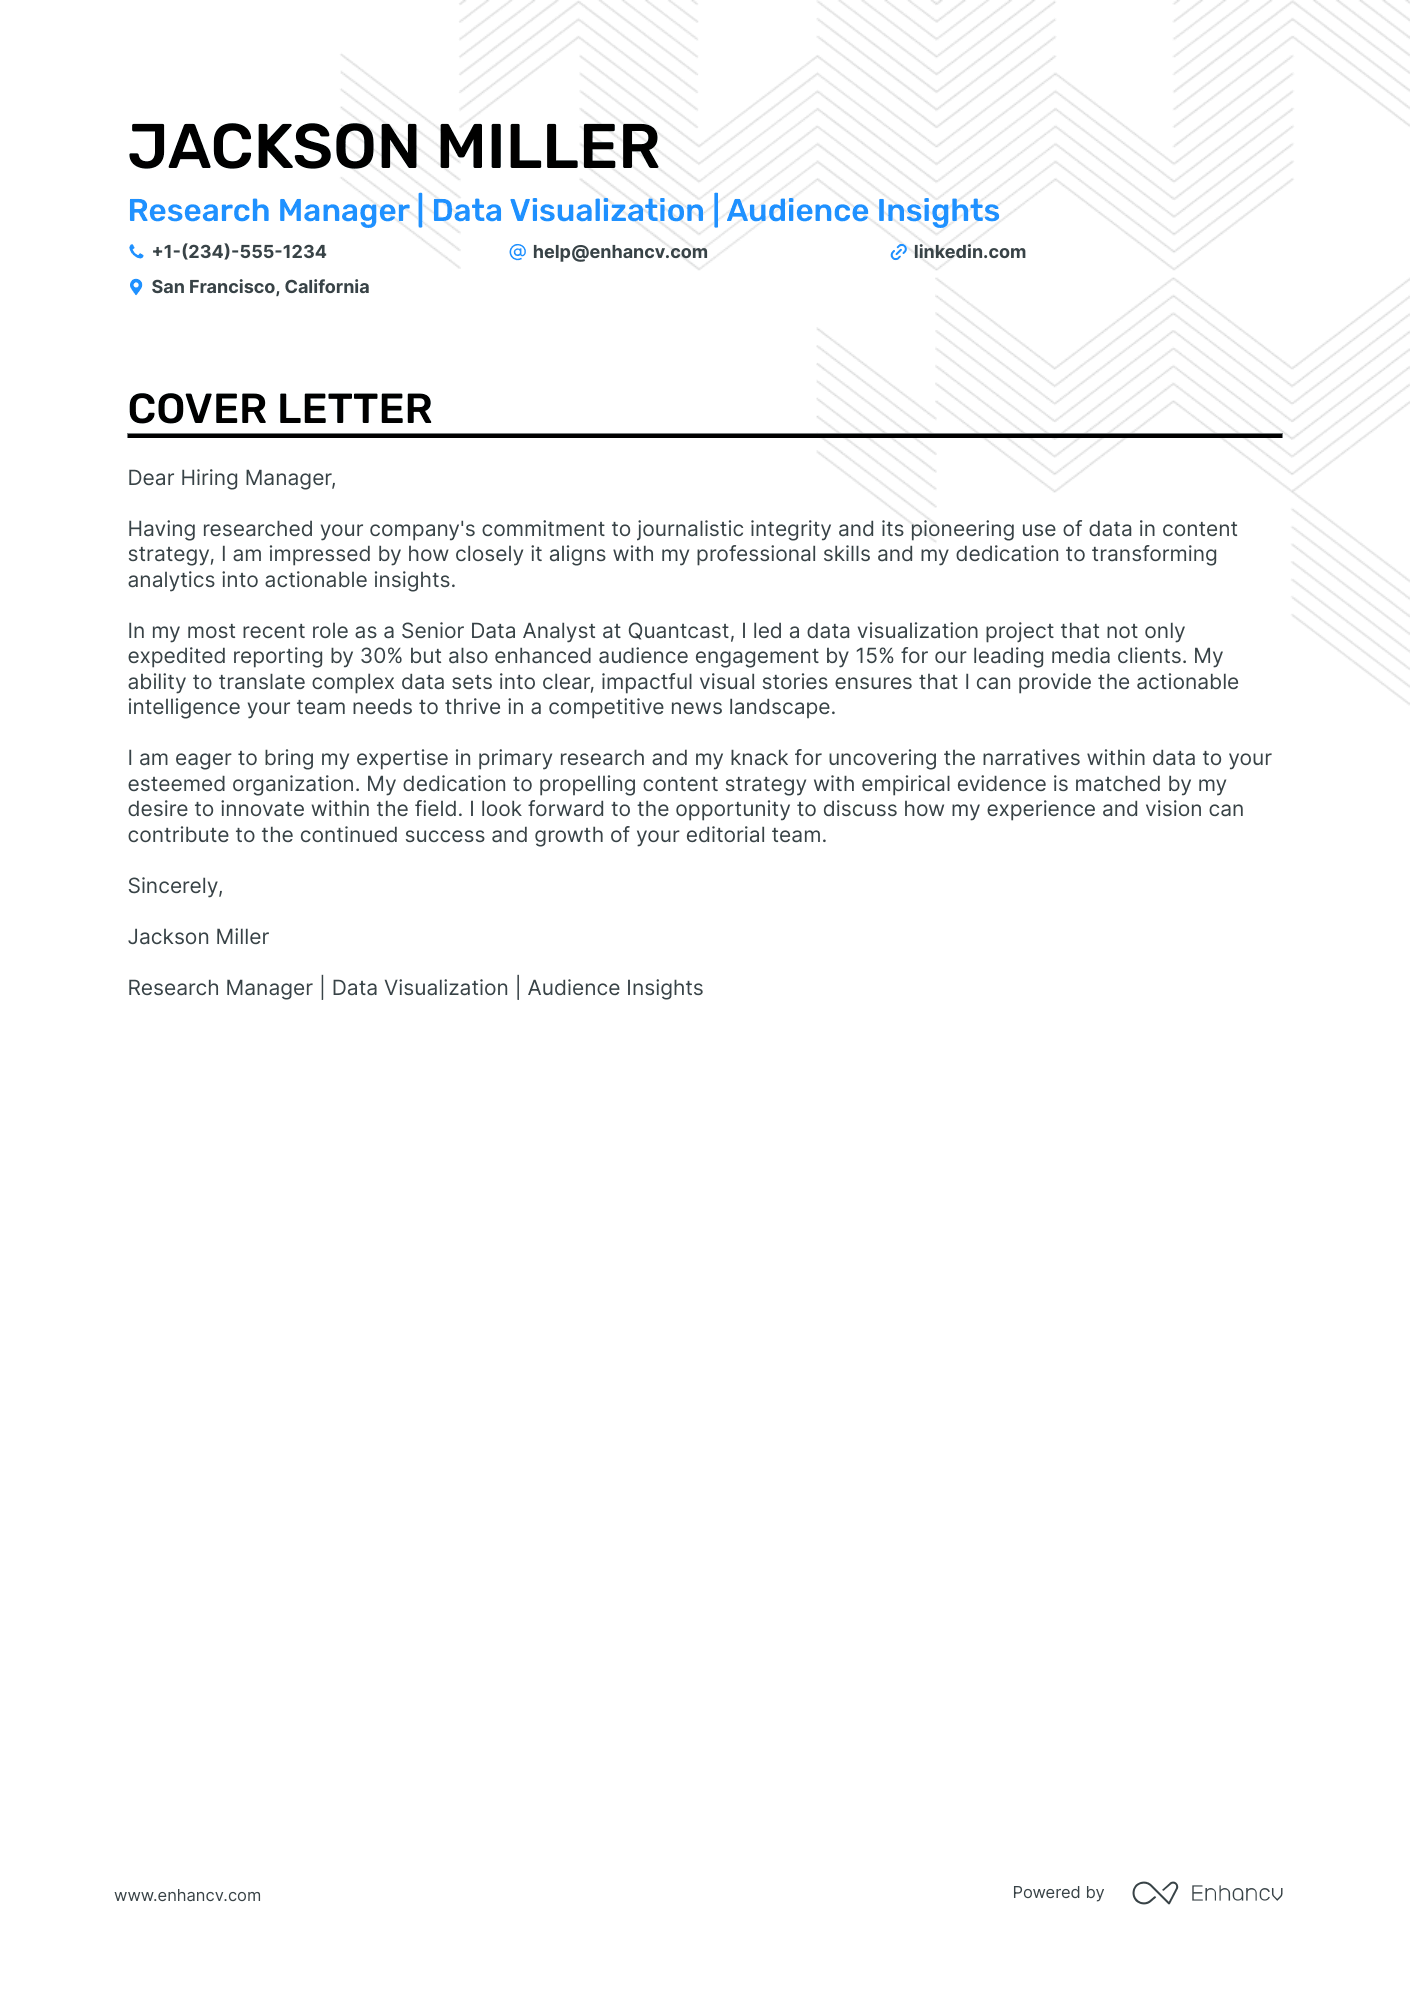 covering letter example for research